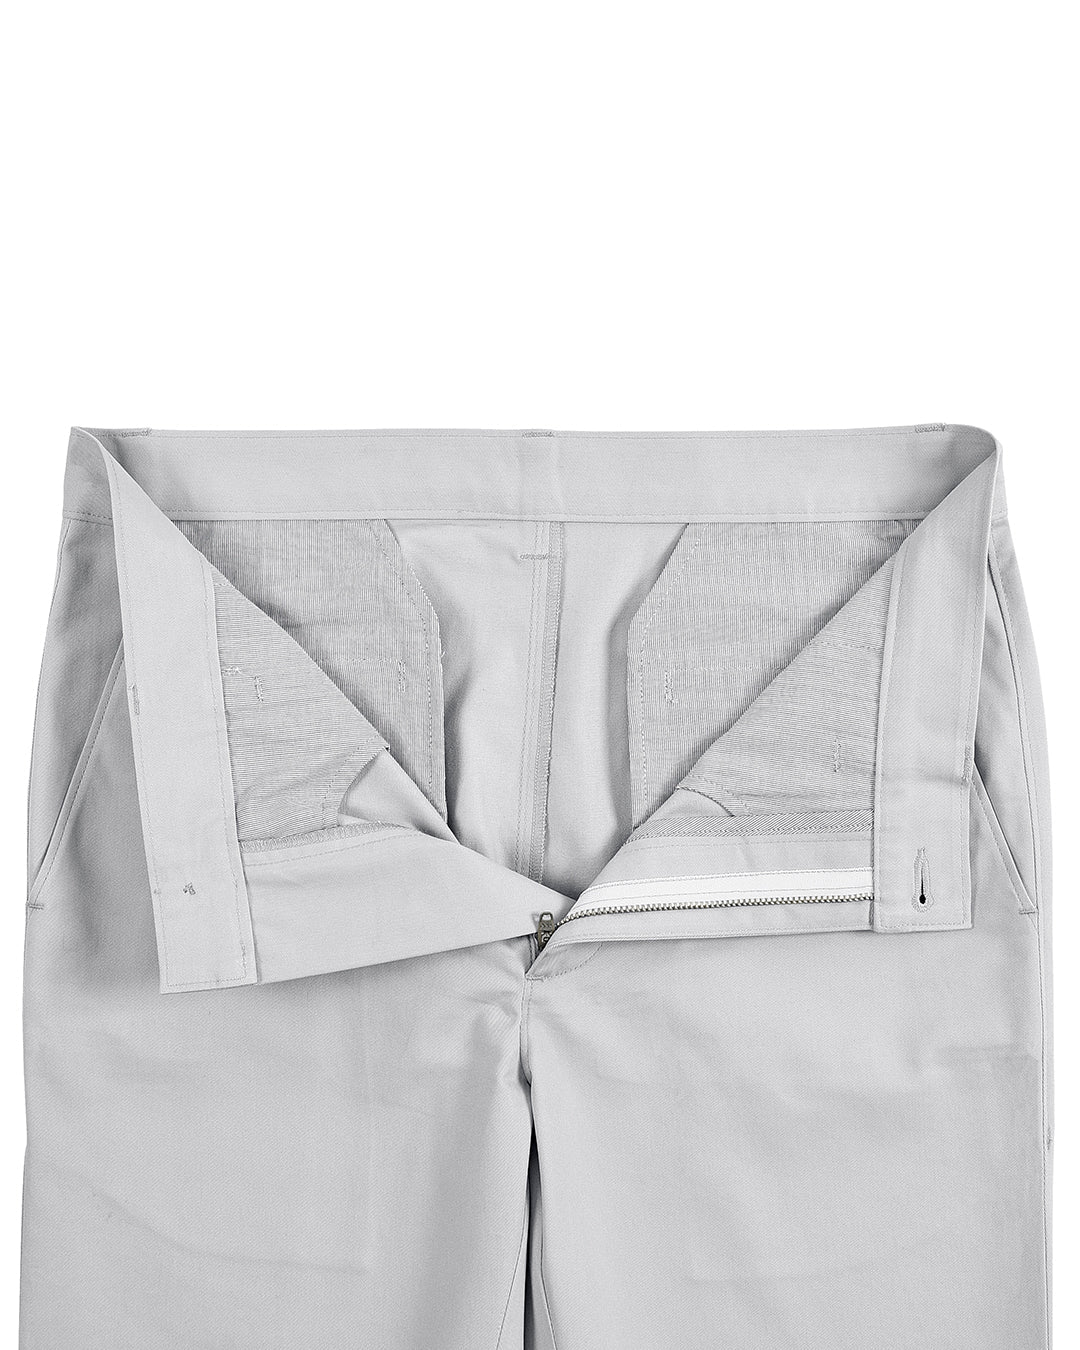 Open front view of custom Genoa Chino pants for men by Luxire in light grey